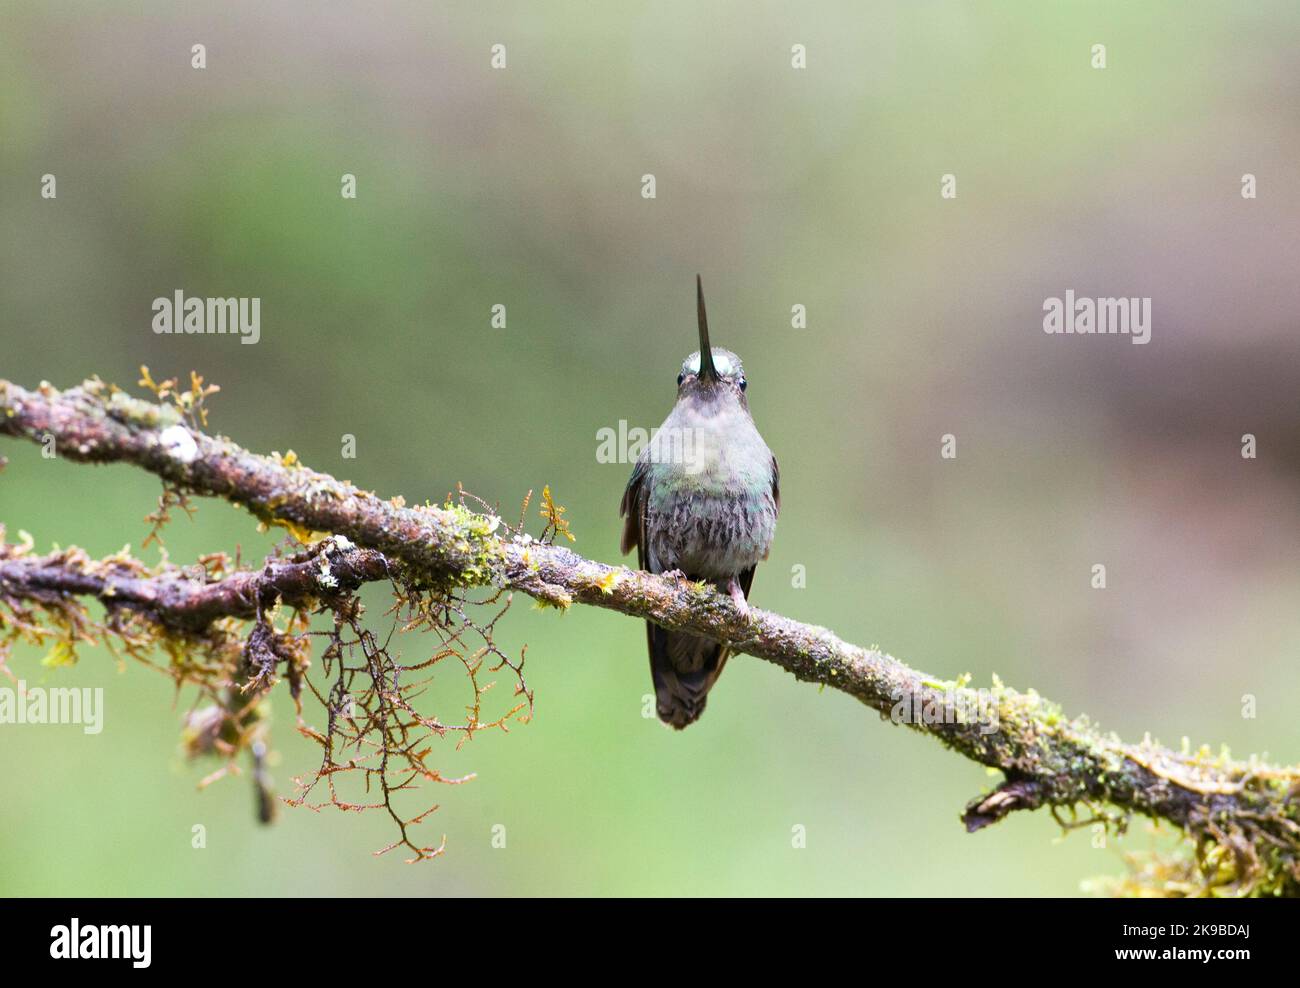 Green-fronted Lancebill (Doryfera ludovicae) perched on mossy branch in Ecuador. Stock Photo